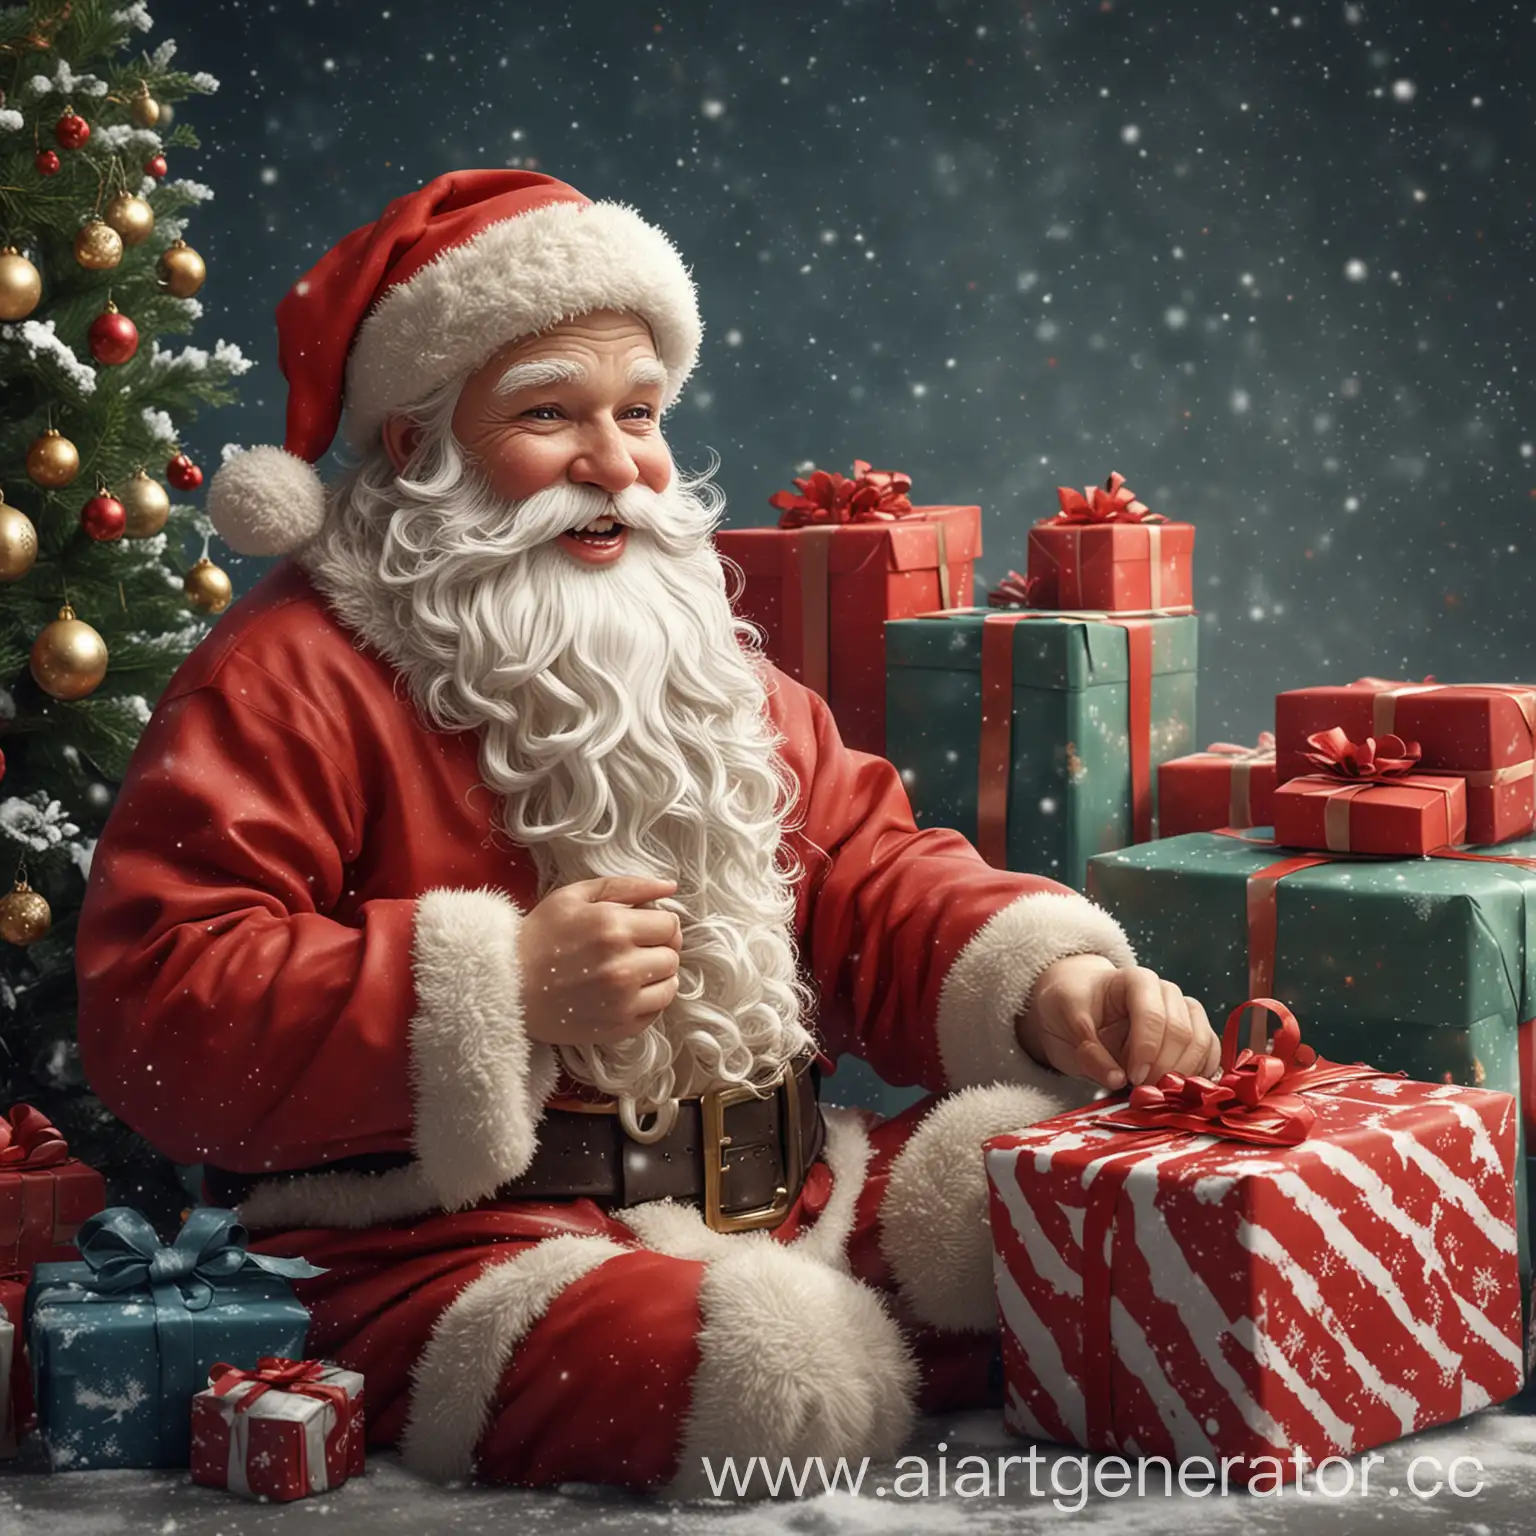 Cheerful-Santa-Claus-Delivering-Gifts-in-a-Winter-Wonderland